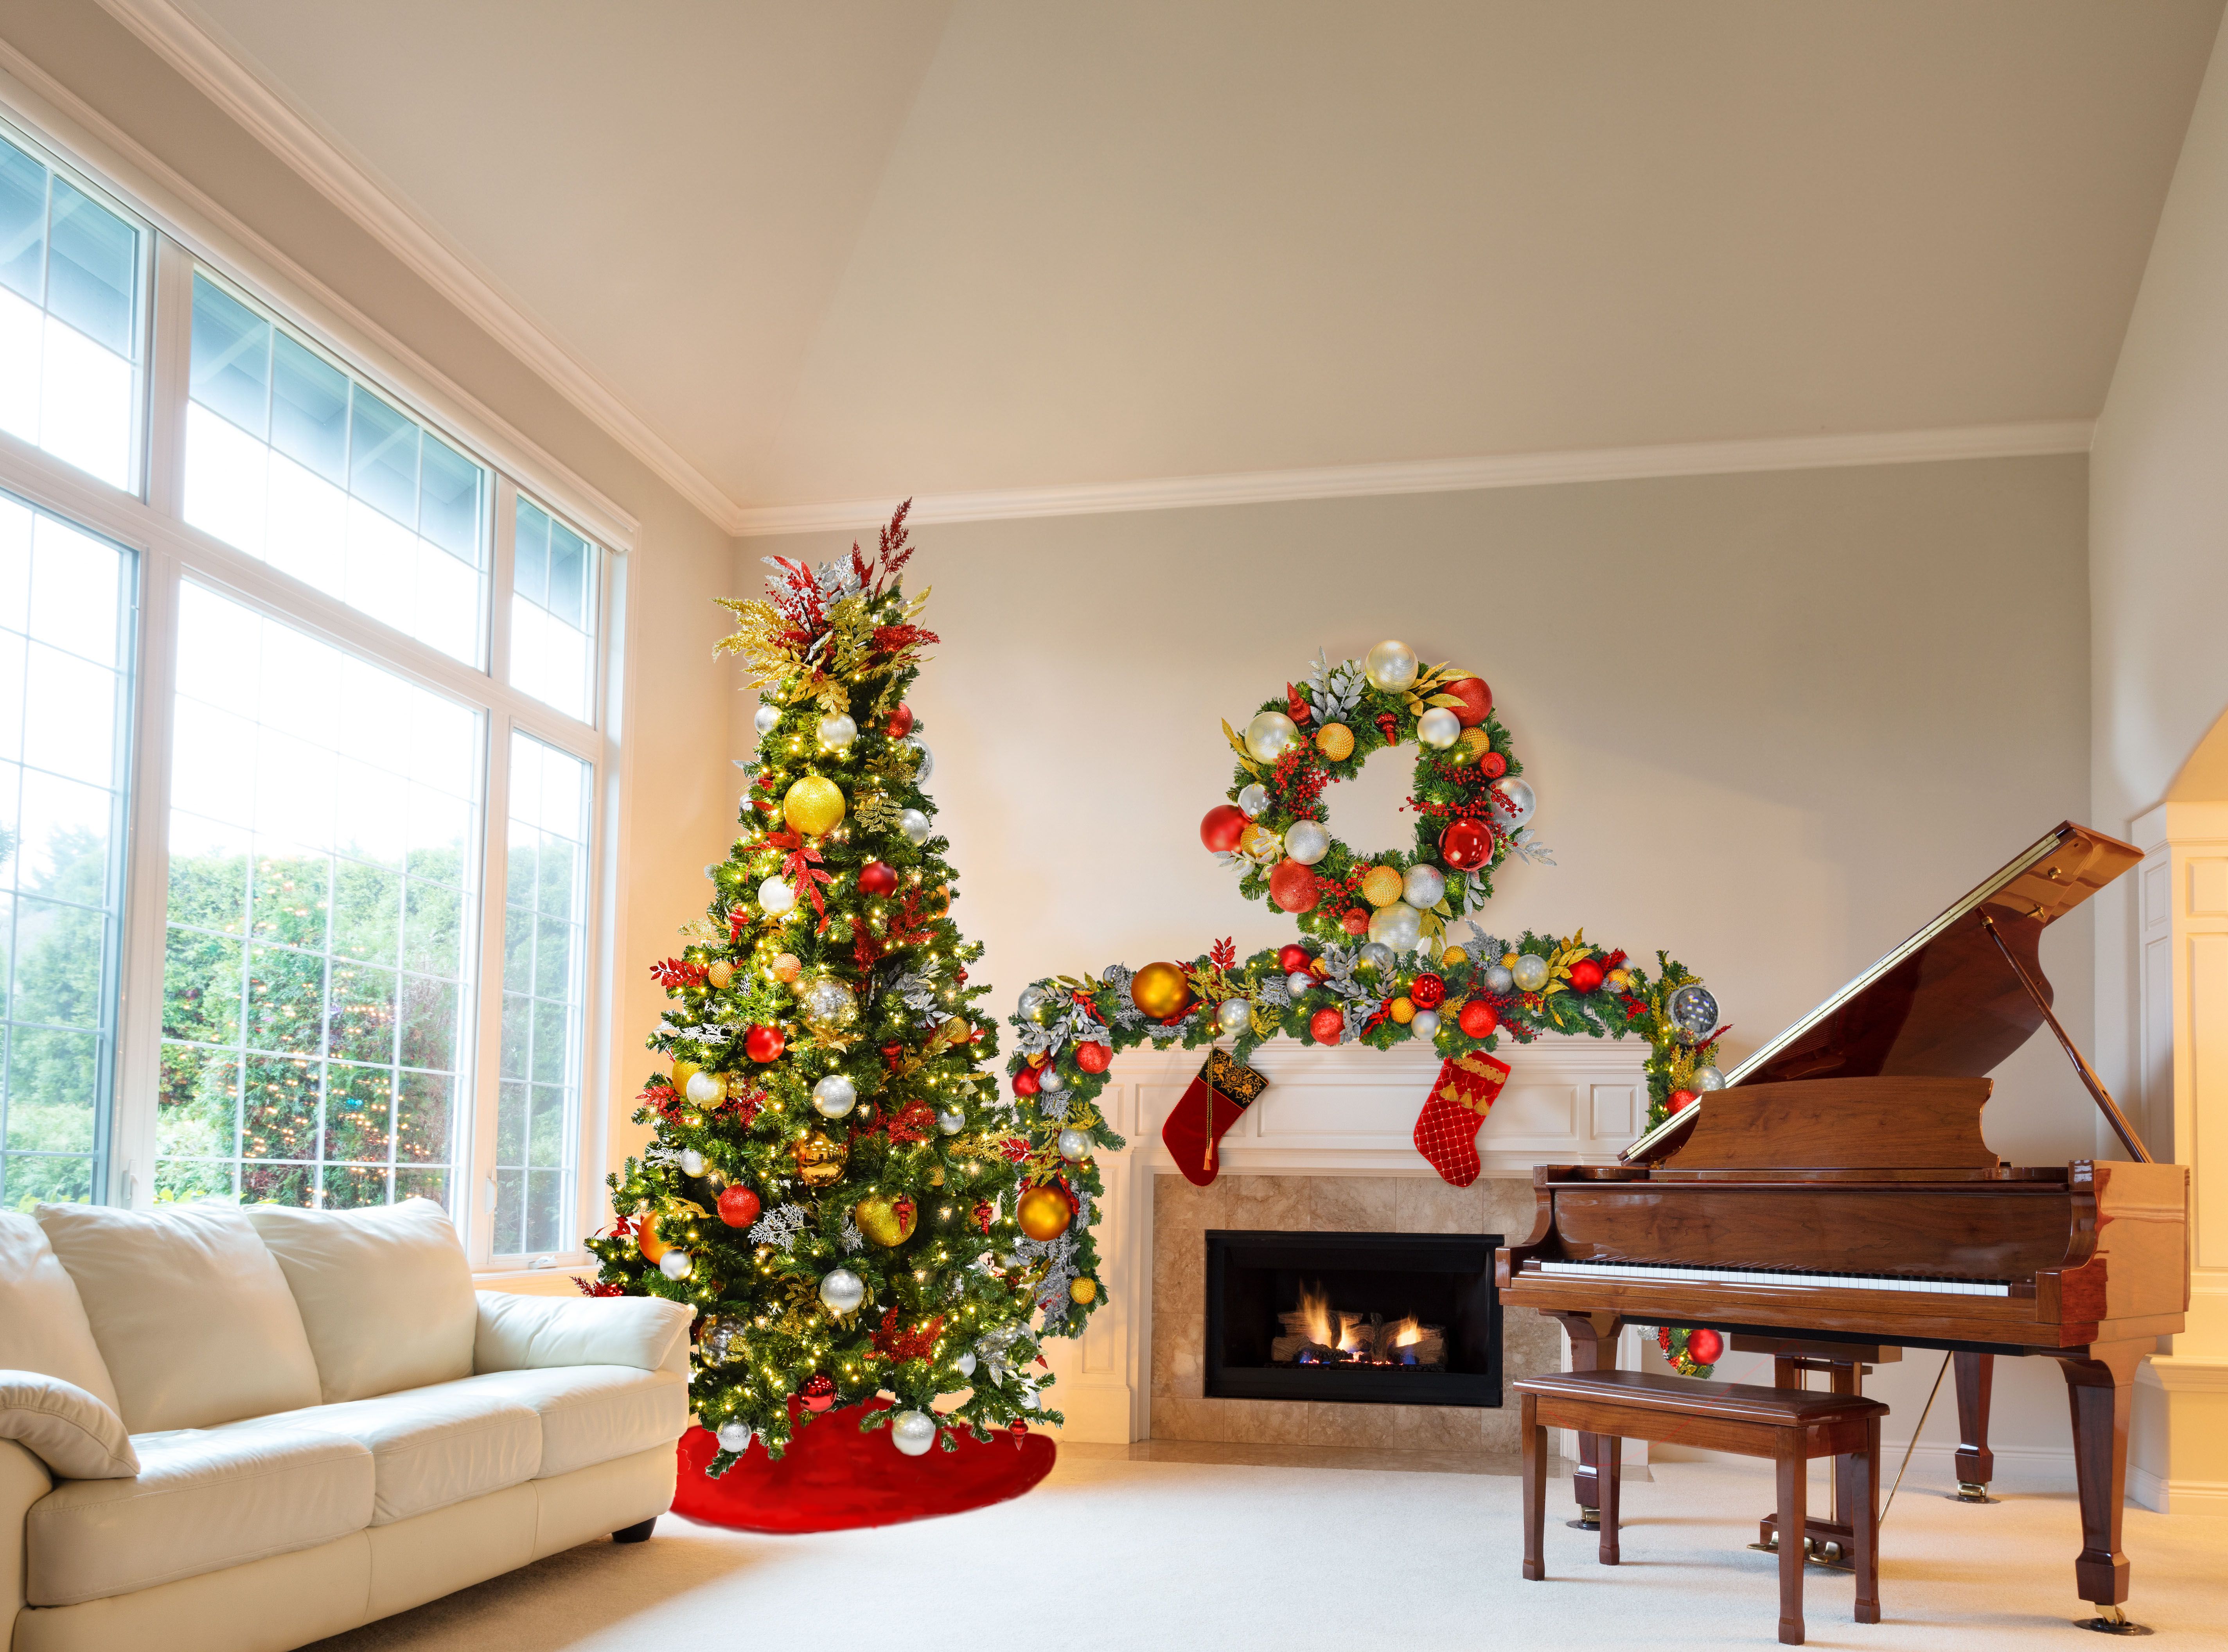 Festive Favorites pre-decorated Christmas greenery in living room